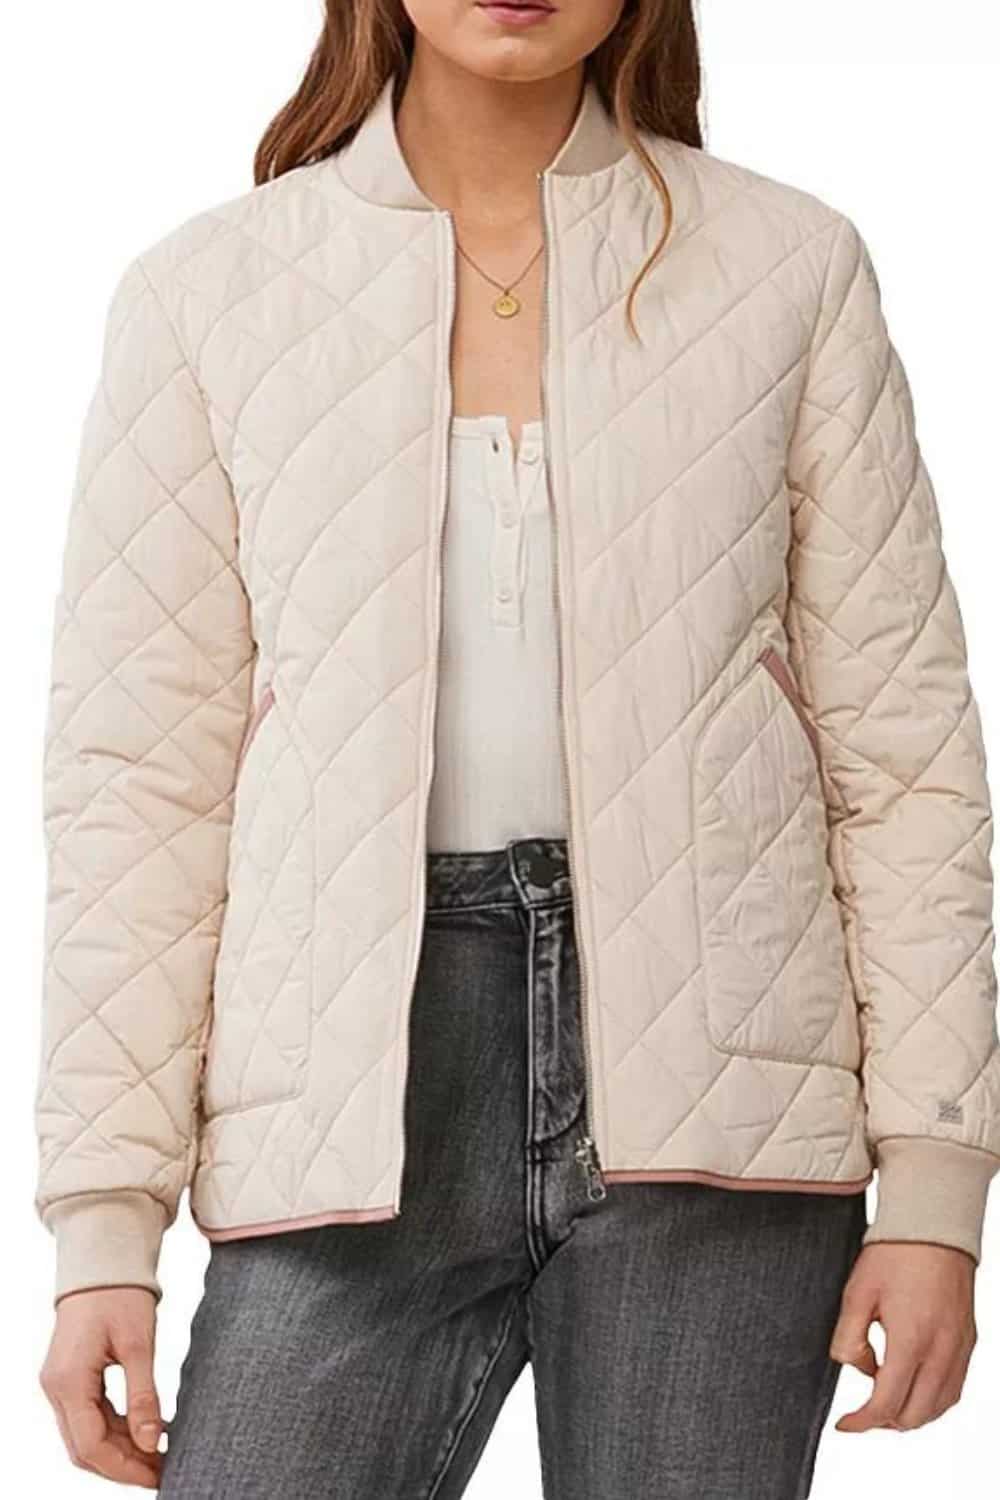 Soia & Kyo Reversible Quilted Jacket